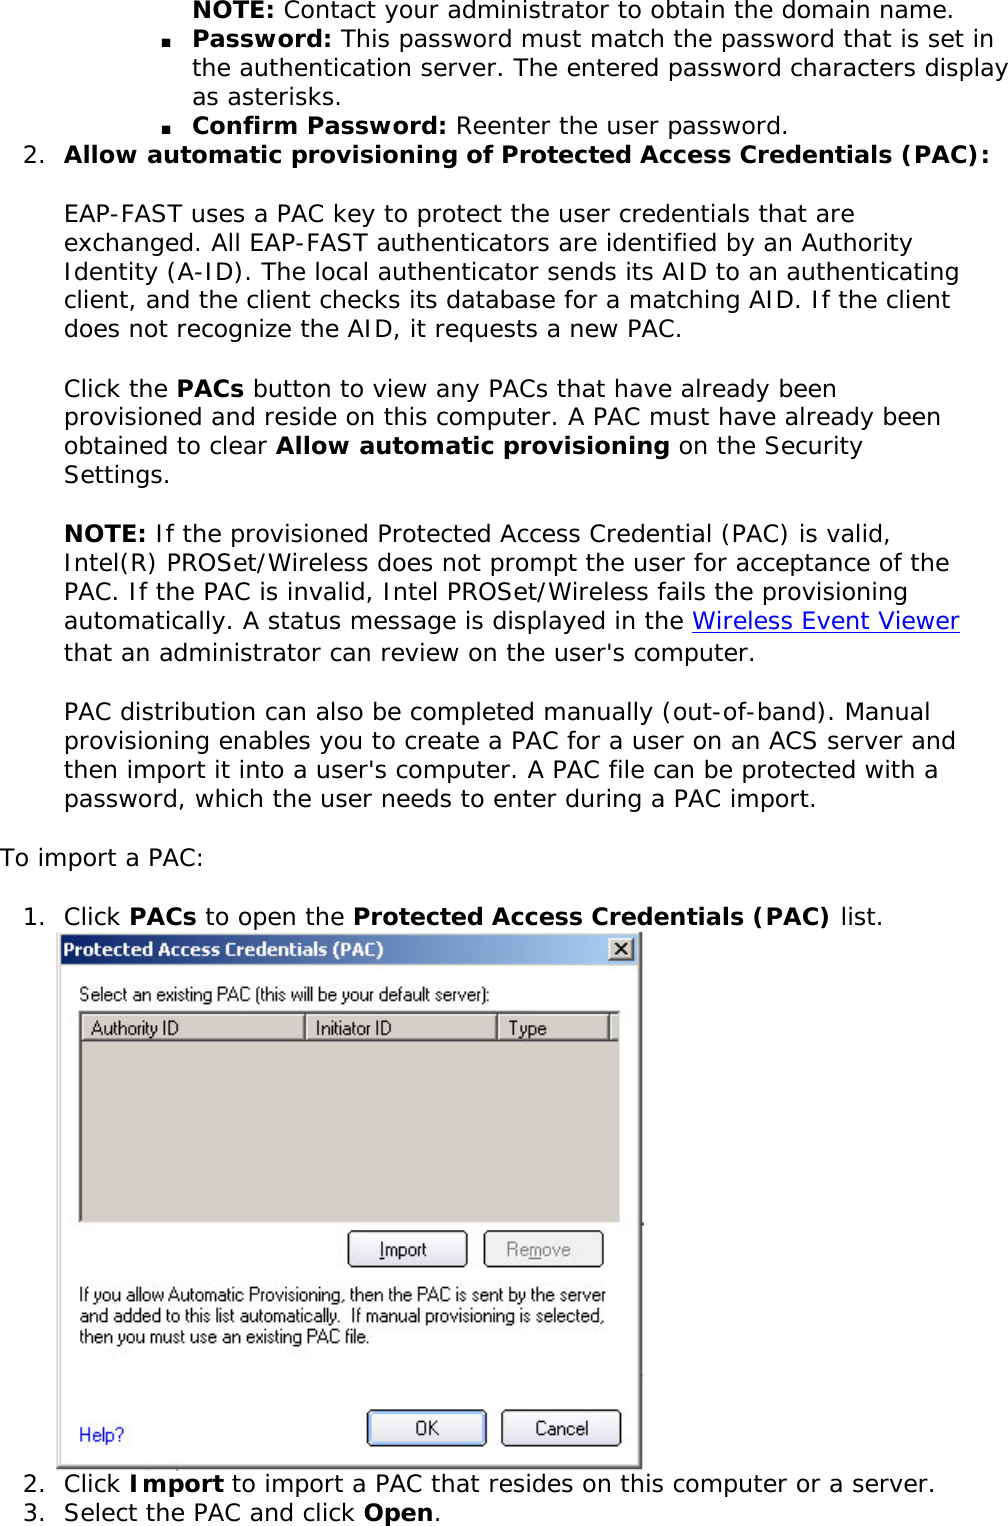 NOTE: Contact your administrator to obtain the domain name. ■     Password: This password must match the password that is set in the authentication server. The entered password characters display as asterisks. ■     Confirm Password: Reenter the user password.2.  Allow automatic provisioning of Protected Access Credentials (PAC): EAP-FAST uses a PAC key to protect the user credentials that are exchanged. All EAP-FAST authenticators are identified by an Authority Identity (A-ID). The local authenticator sends its AID to an authenticating client, and the client checks its database for a matching AID. If the client does not recognize the AID, it requests a new PAC. Click the PACs button to view any PACs that have already been provisioned and reside on this computer. A PAC must have already been obtained to clear Allow automatic provisioning on the Security Settings. NOTE: If the provisioned Protected Access Credential (PAC) is valid, Intel(R) PROSet/Wireless does not prompt the user for acceptance of the PAC. If the PAC is invalid, Intel PROSet/Wireless fails the provisioning automatically. A status message is displayed in the Wireless Event Viewer that an administrator can review on the user&apos;s computer. PAC distribution can also be completed manually (out-of-band). Manual provisioning enables you to create a PAC for a user on an ACS server and then import it into a user&apos;s computer. A PAC file can be protected with a password, which the user needs to enter during a PAC import. To import a PAC: 1.  Click PACs to open the Protected Access Credentials (PAC) list. 2.  Click Import to import a PAC that resides on this computer or a server. 3.  Select the PAC and click Open.